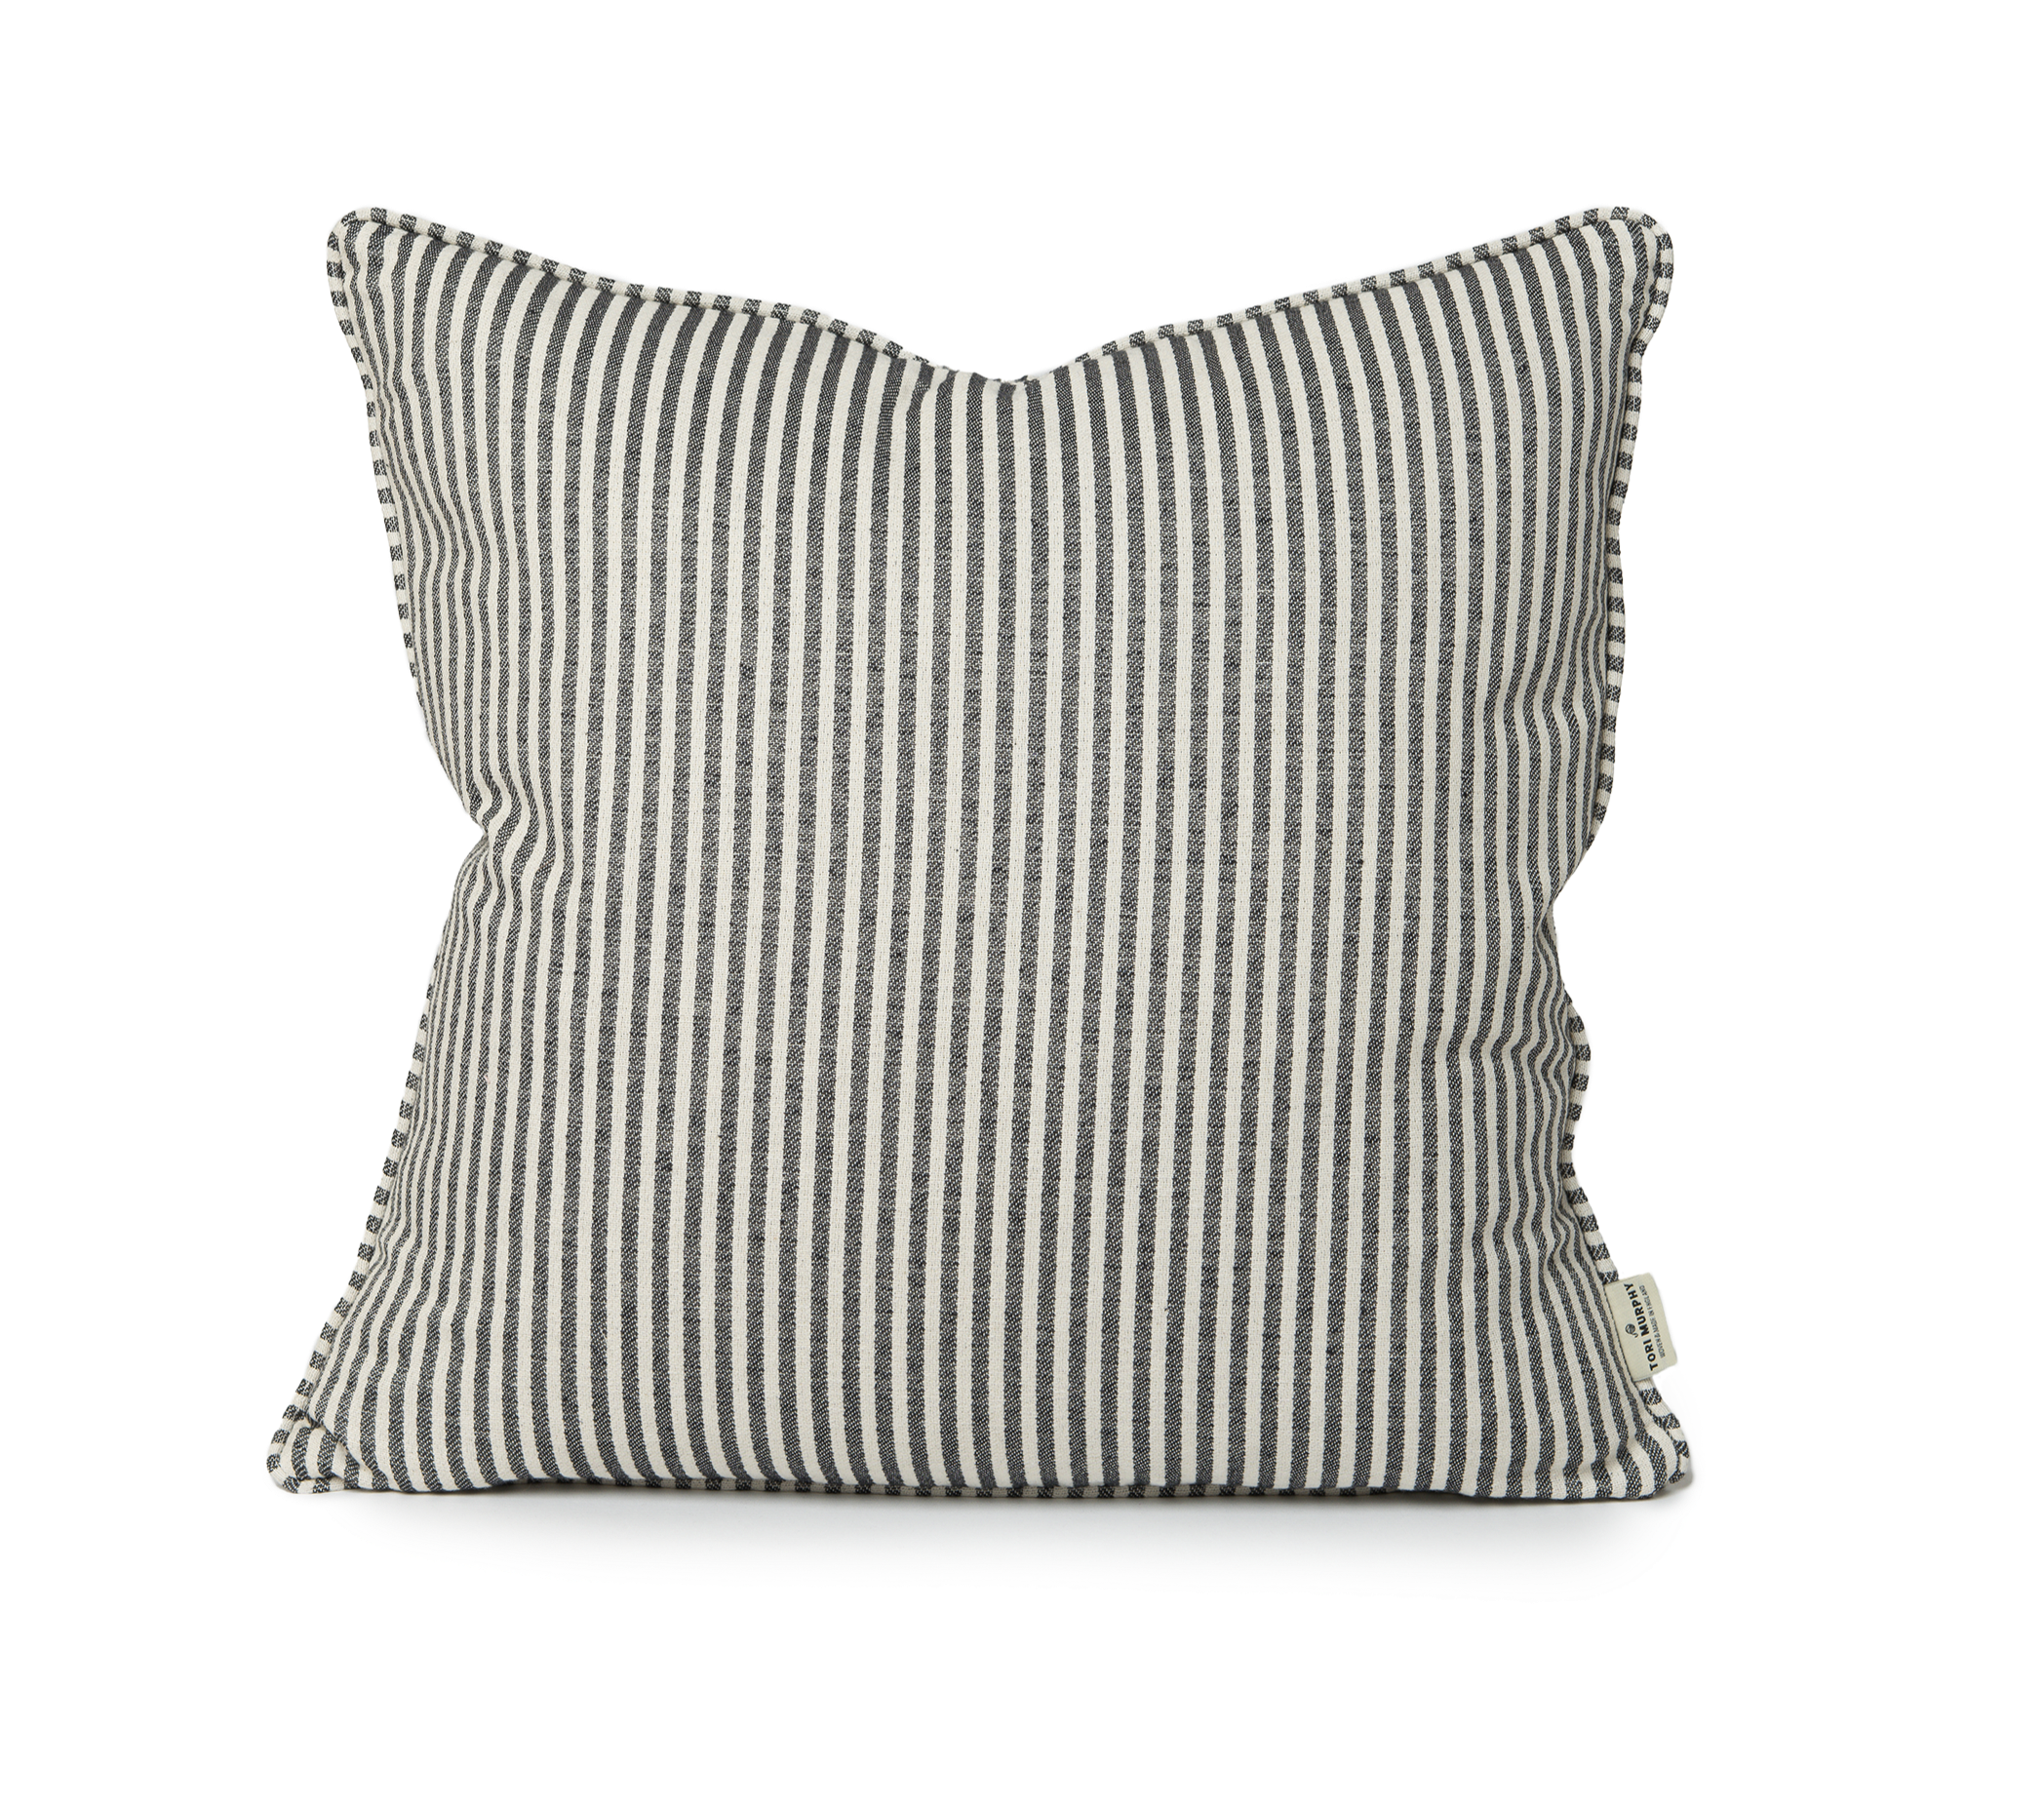 Harbour Stripe Piped Cushion Black